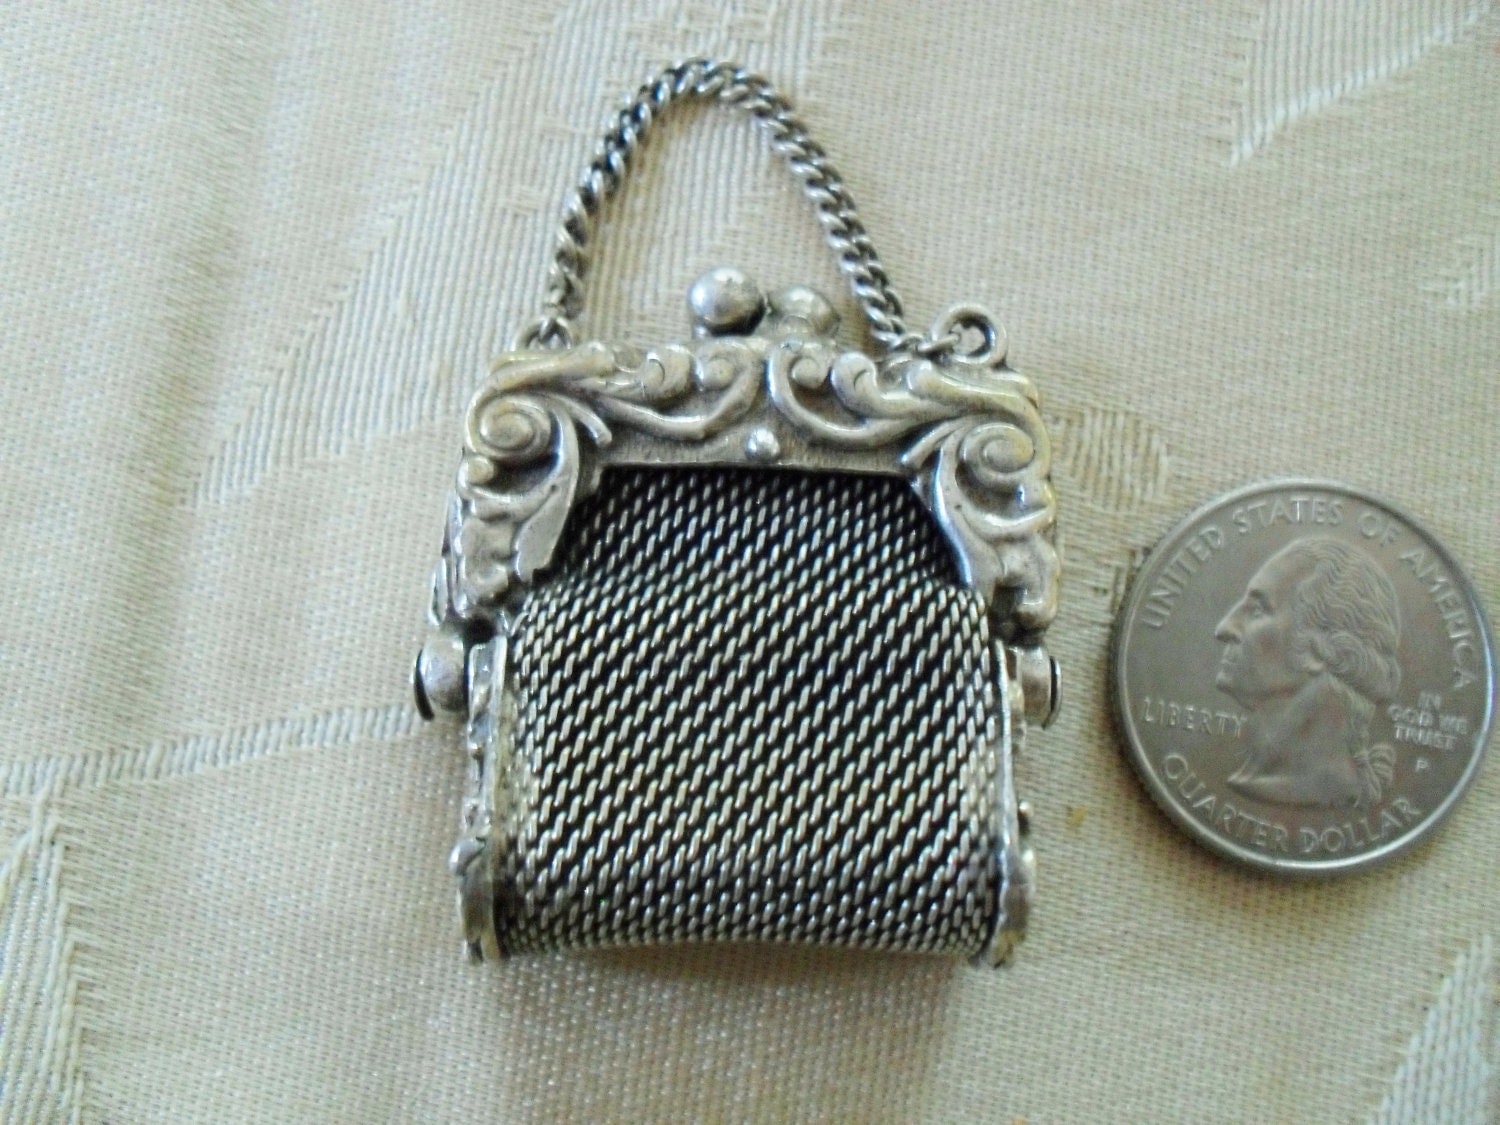 Antique 1920s Mesh Mini Coin Purse by vintagevogue3 on Etsy